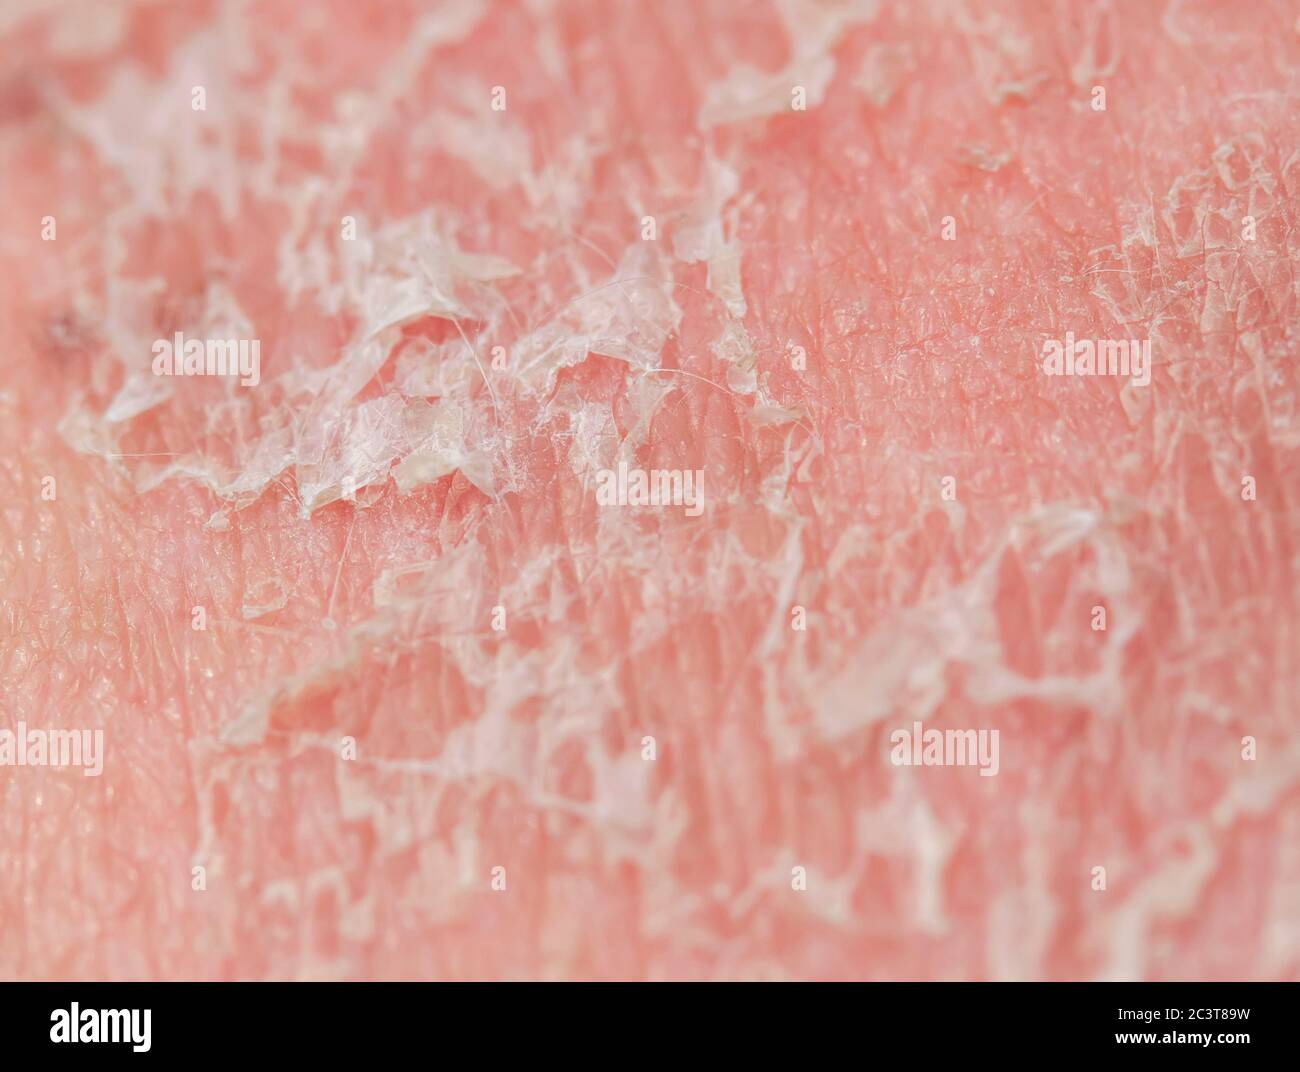 texture of irritated unhealthy skin with scales of dead cells and redness after sunburn and allergies on the human body Stock Photo